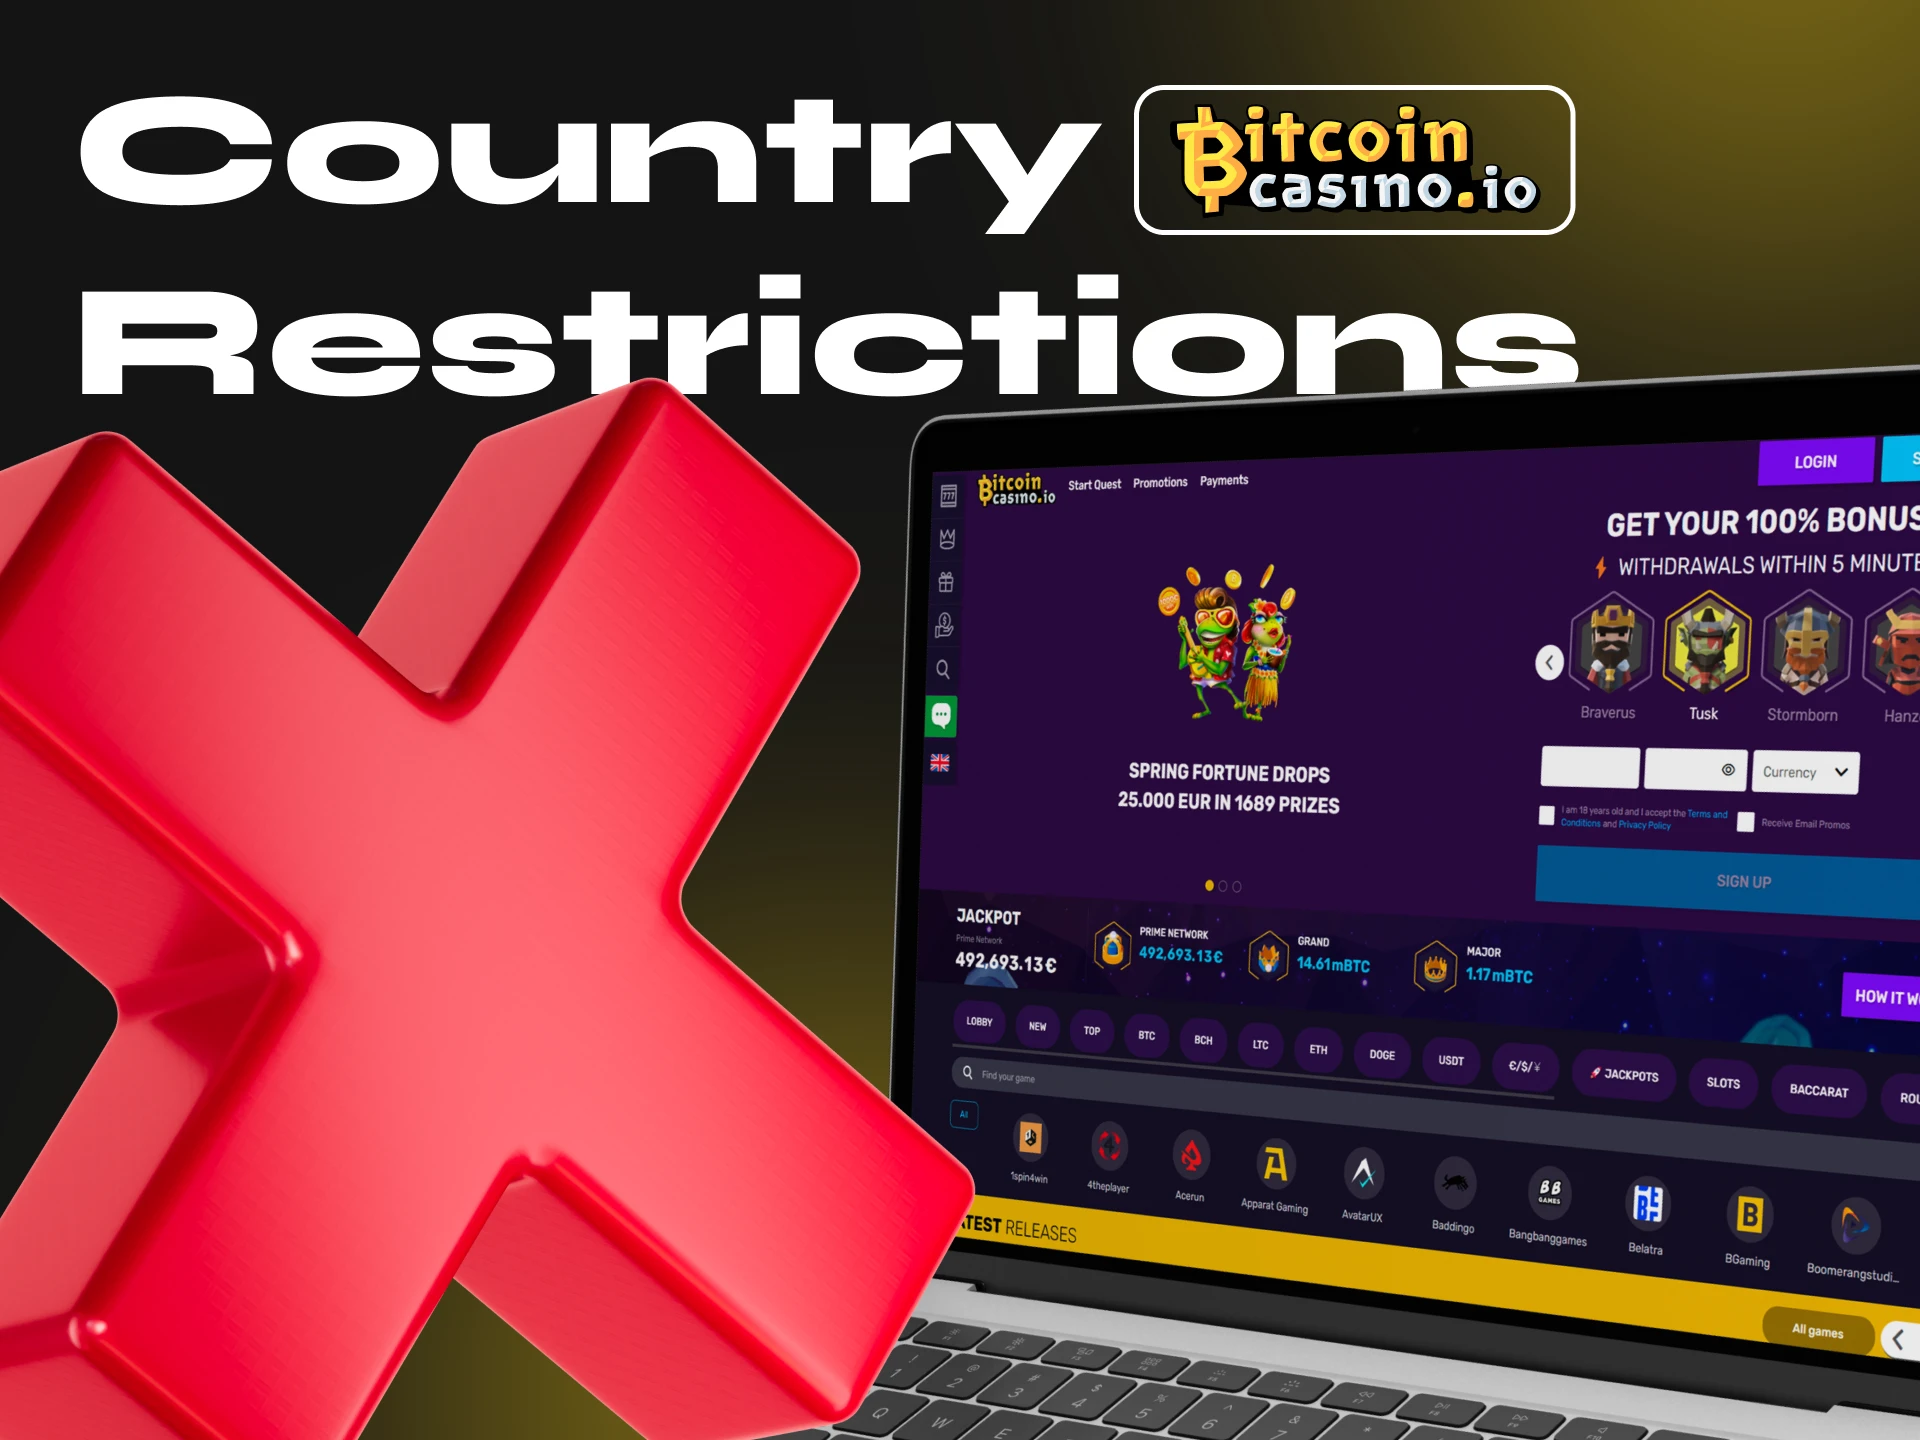 Unfortunately, Bitcoincasino do not operate in these countries.